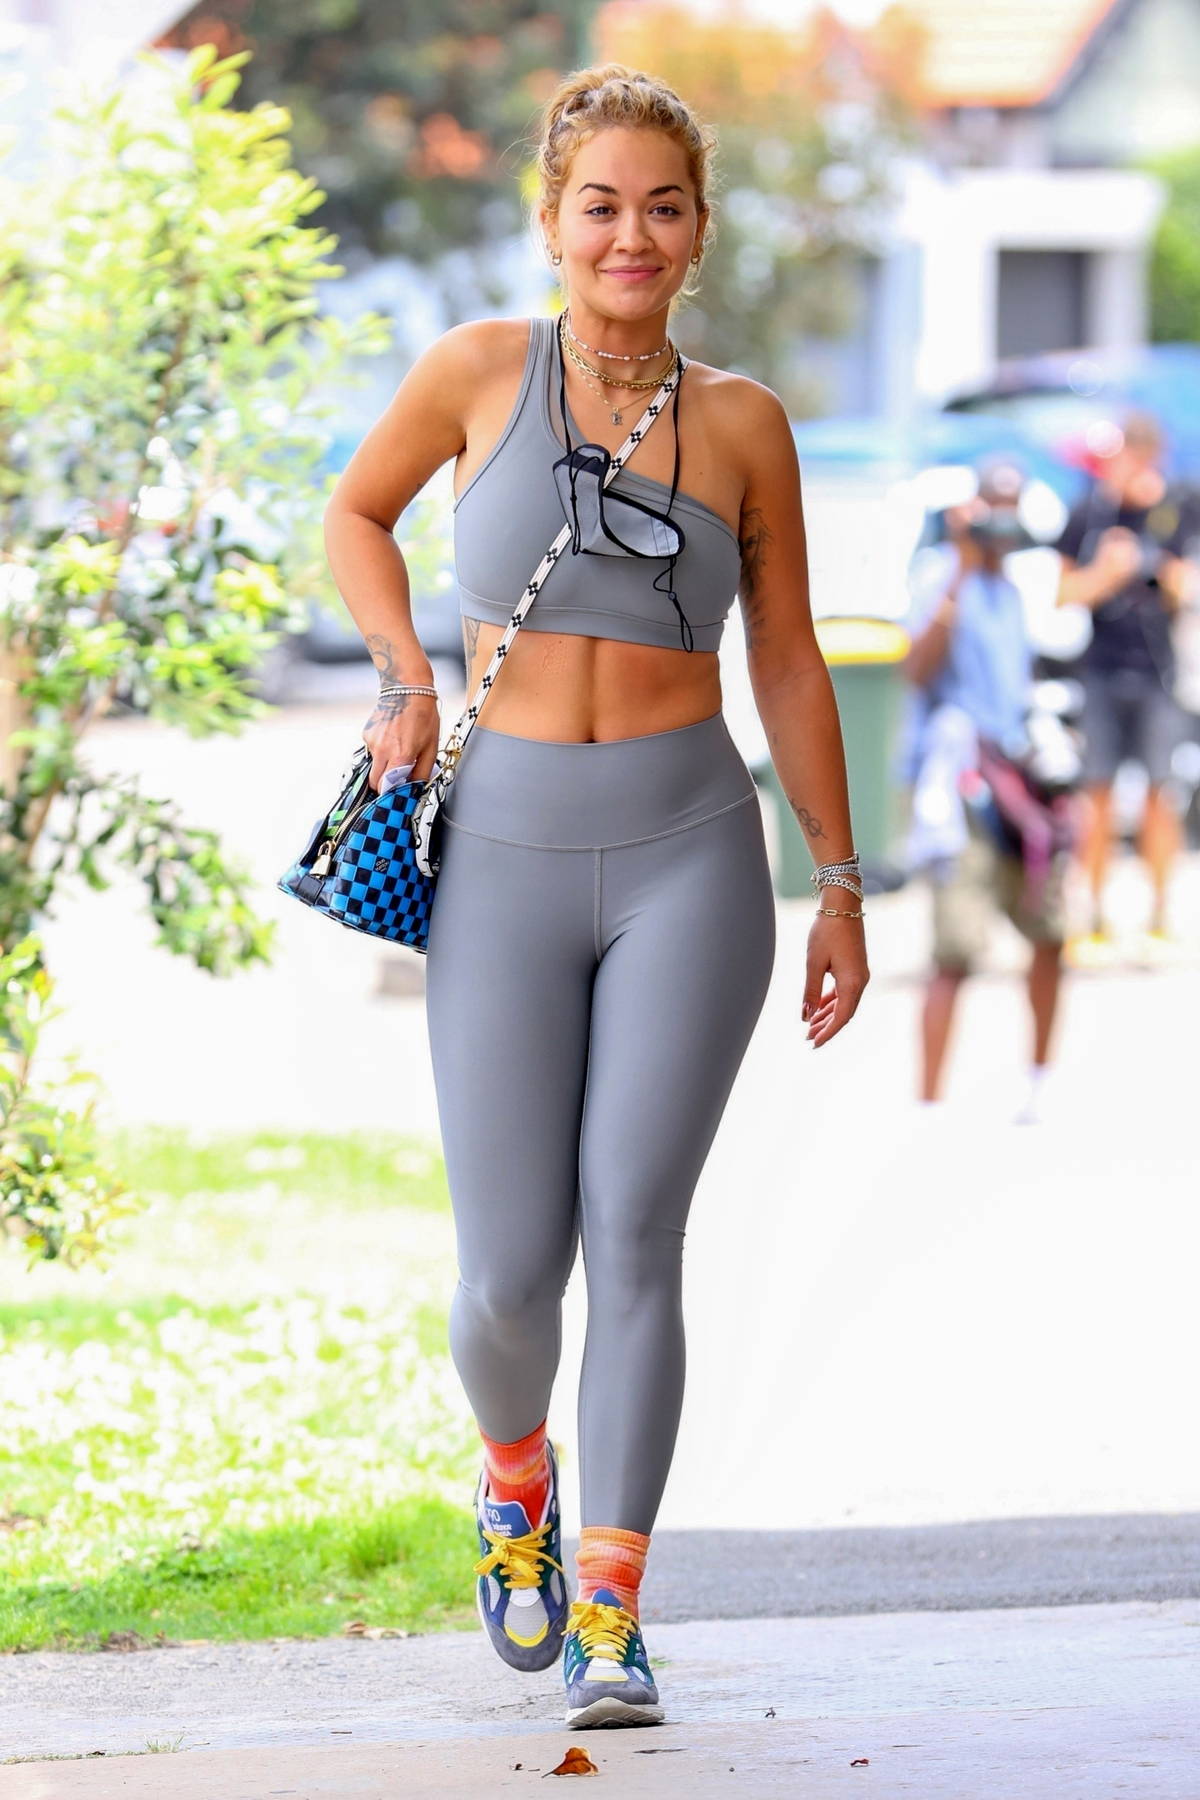 Rita Ora shows off her perfectly toned body in grey sports bra and leggings  while stepping